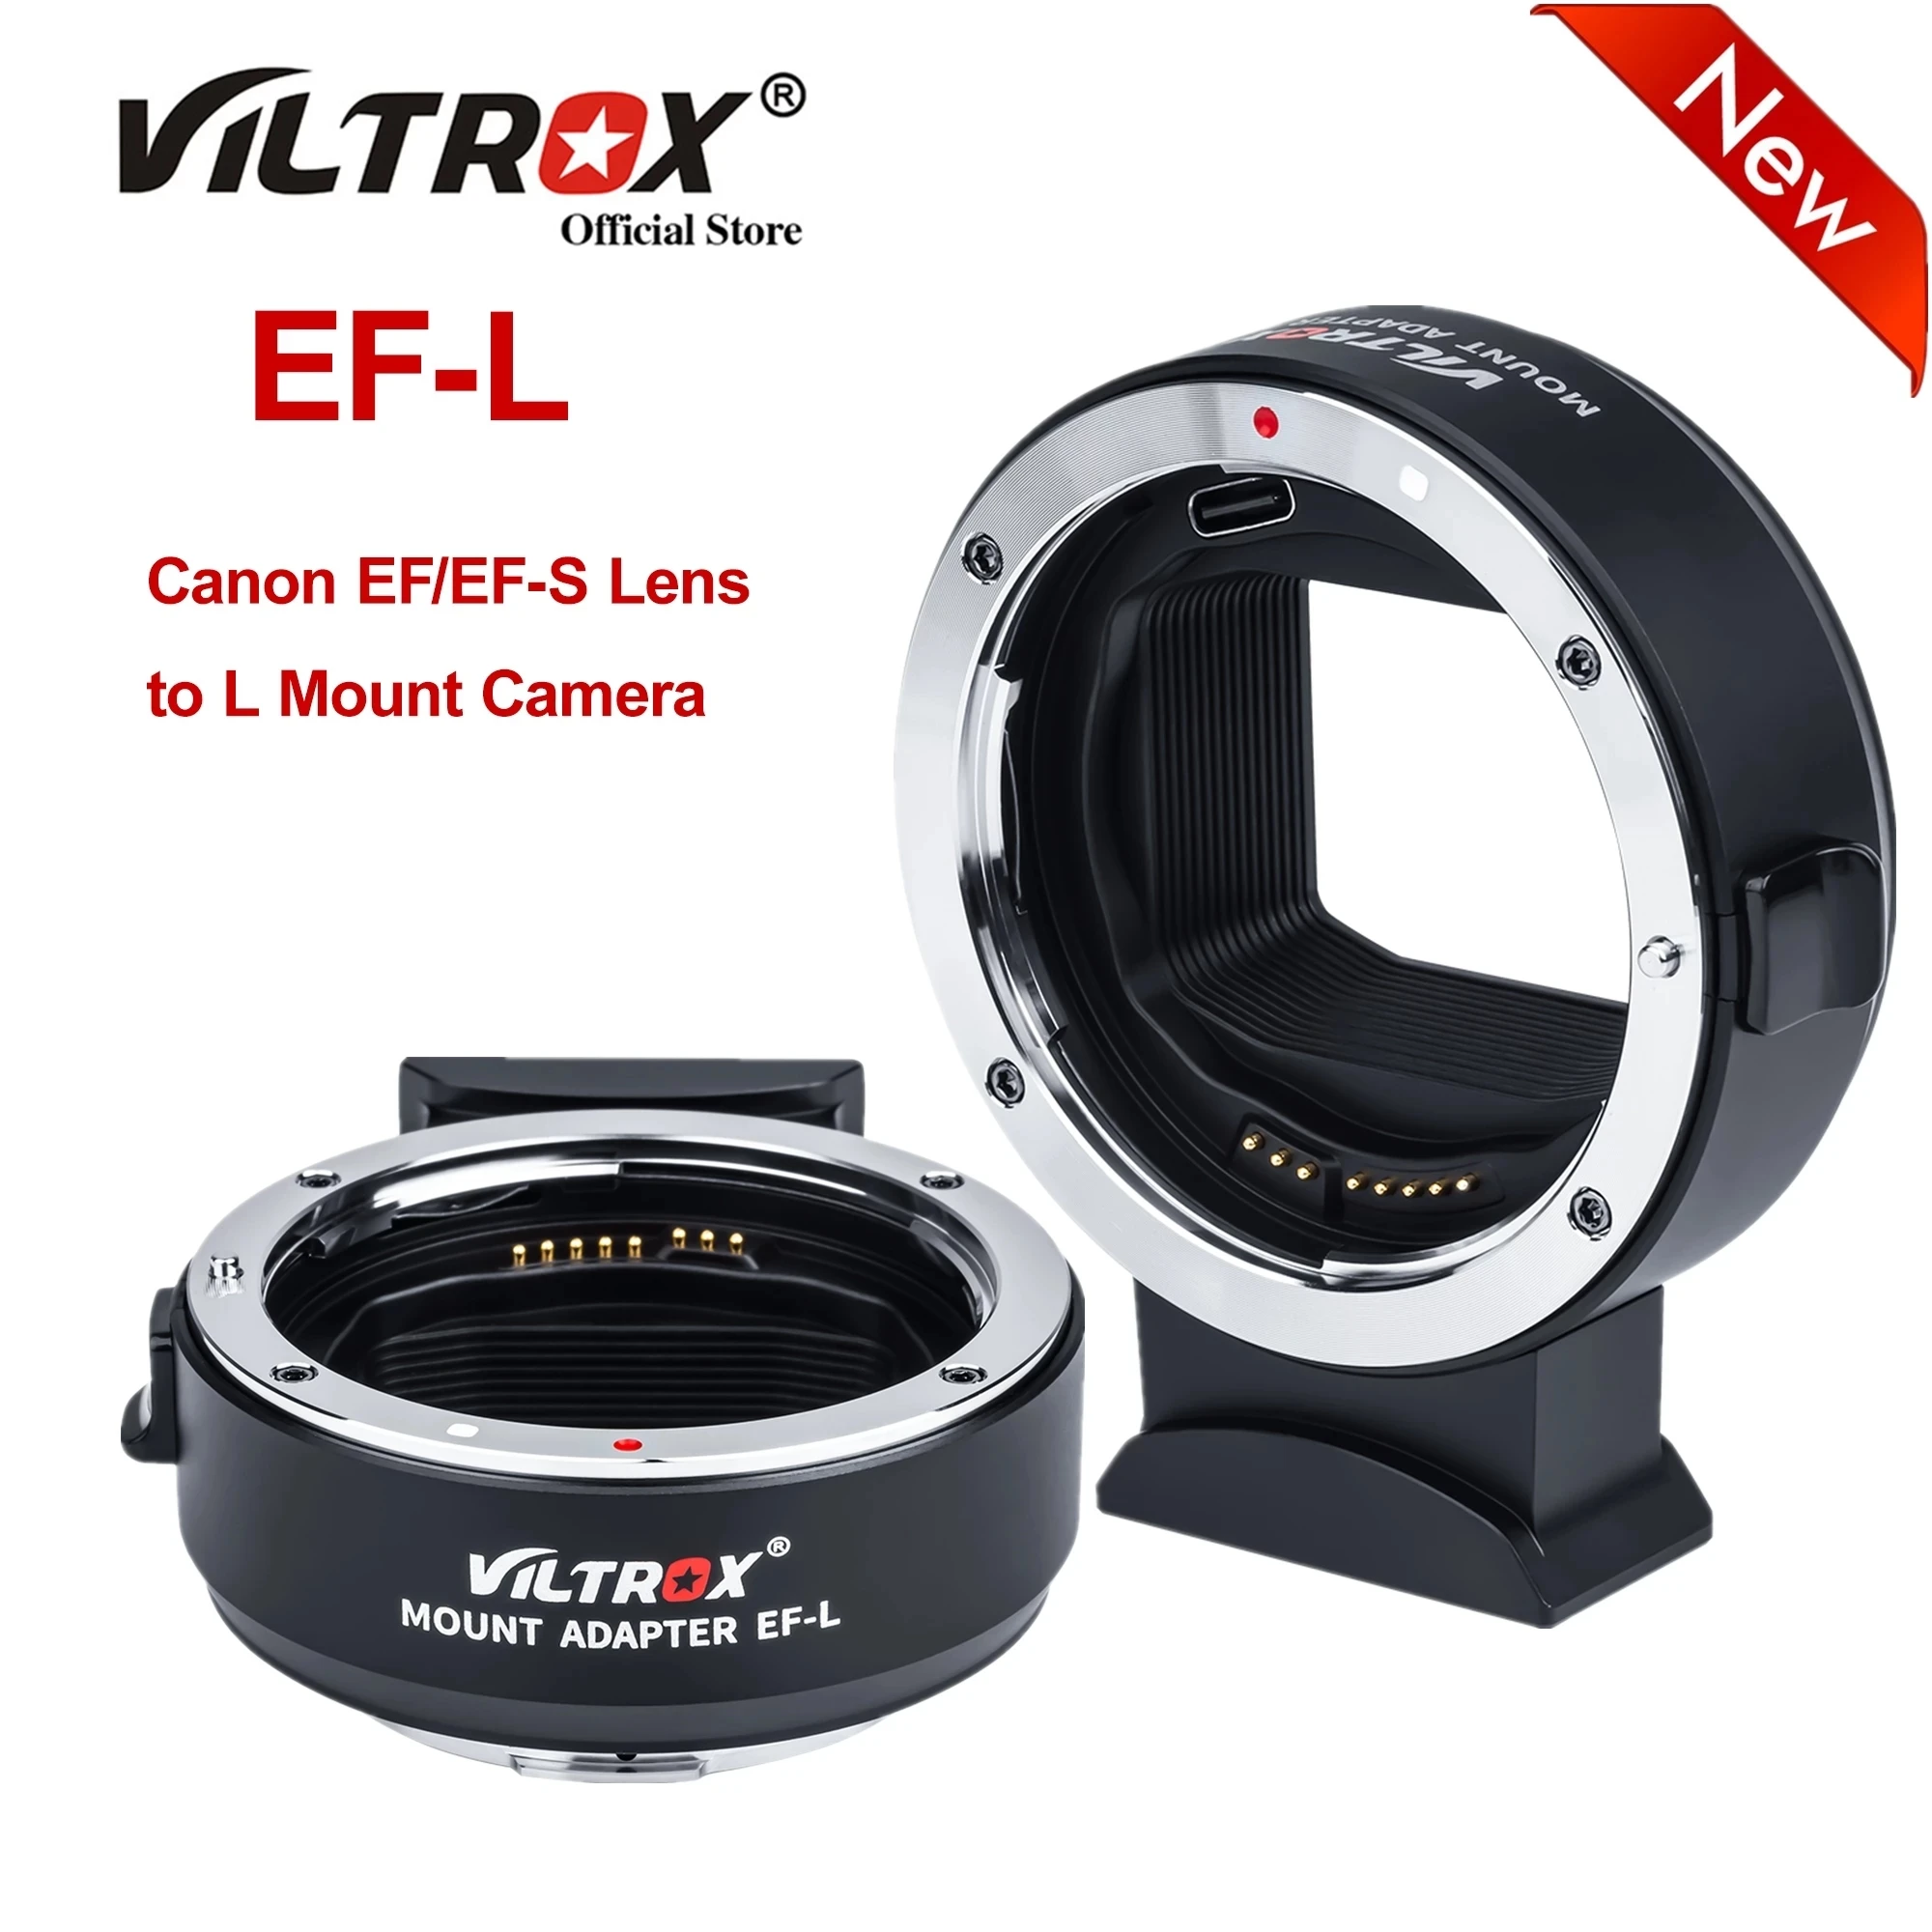 

Viltrox EF-L Auto Focus Lens Mount Adapter For Canon EF EF-S Lens to Leica SL2 Panasonic S1 S1R S1H S5 Sigma fp L Mount Camera